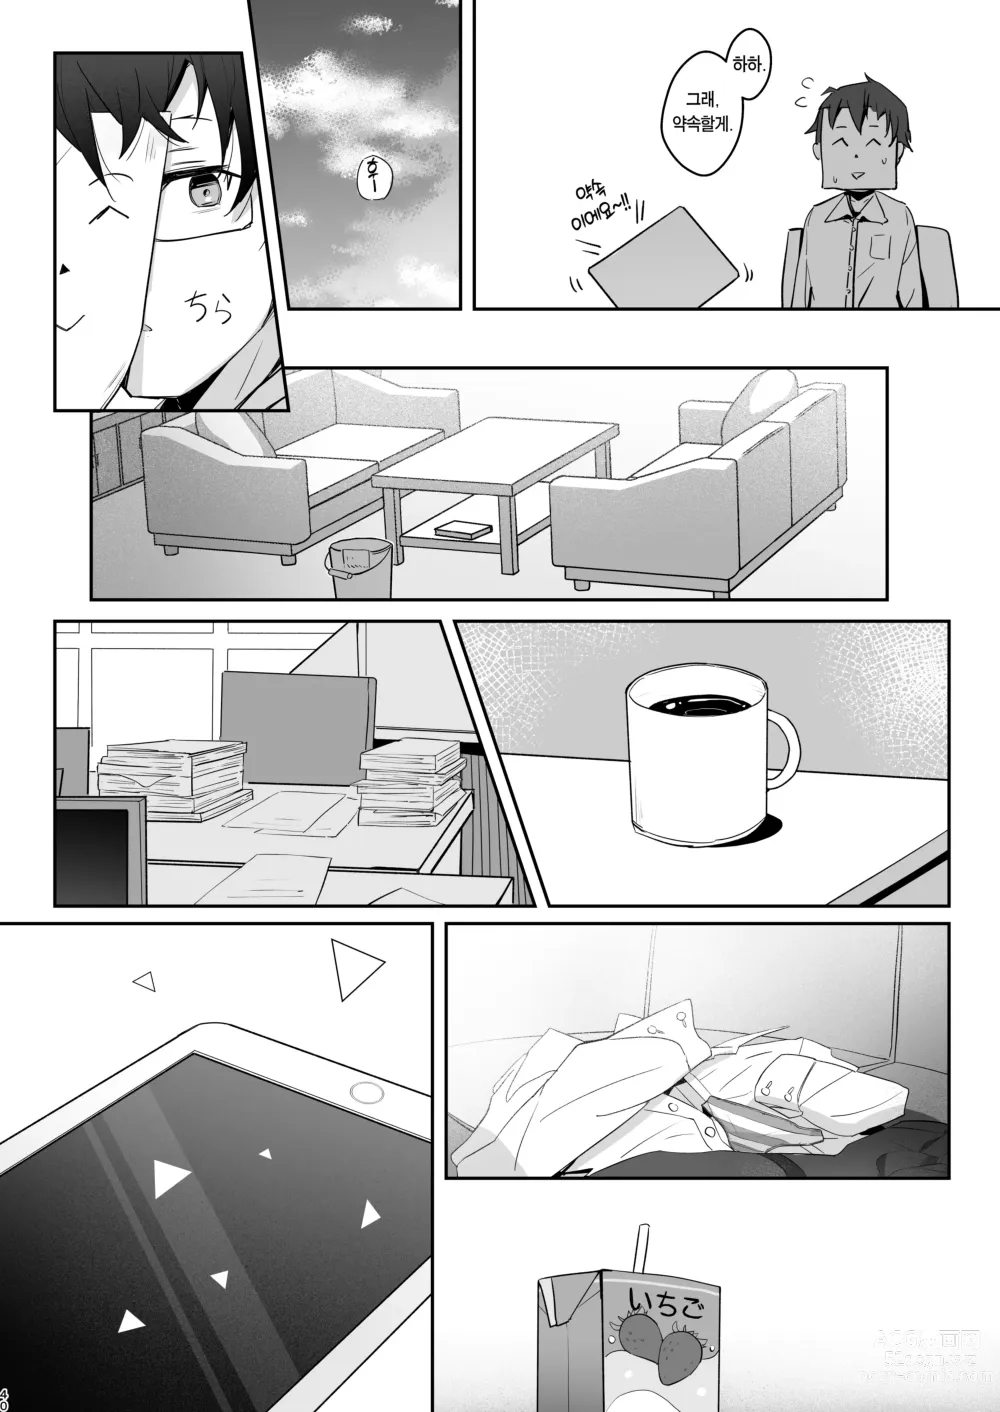 Page 39 of doujinshi 이 따스함을 알아버렸어